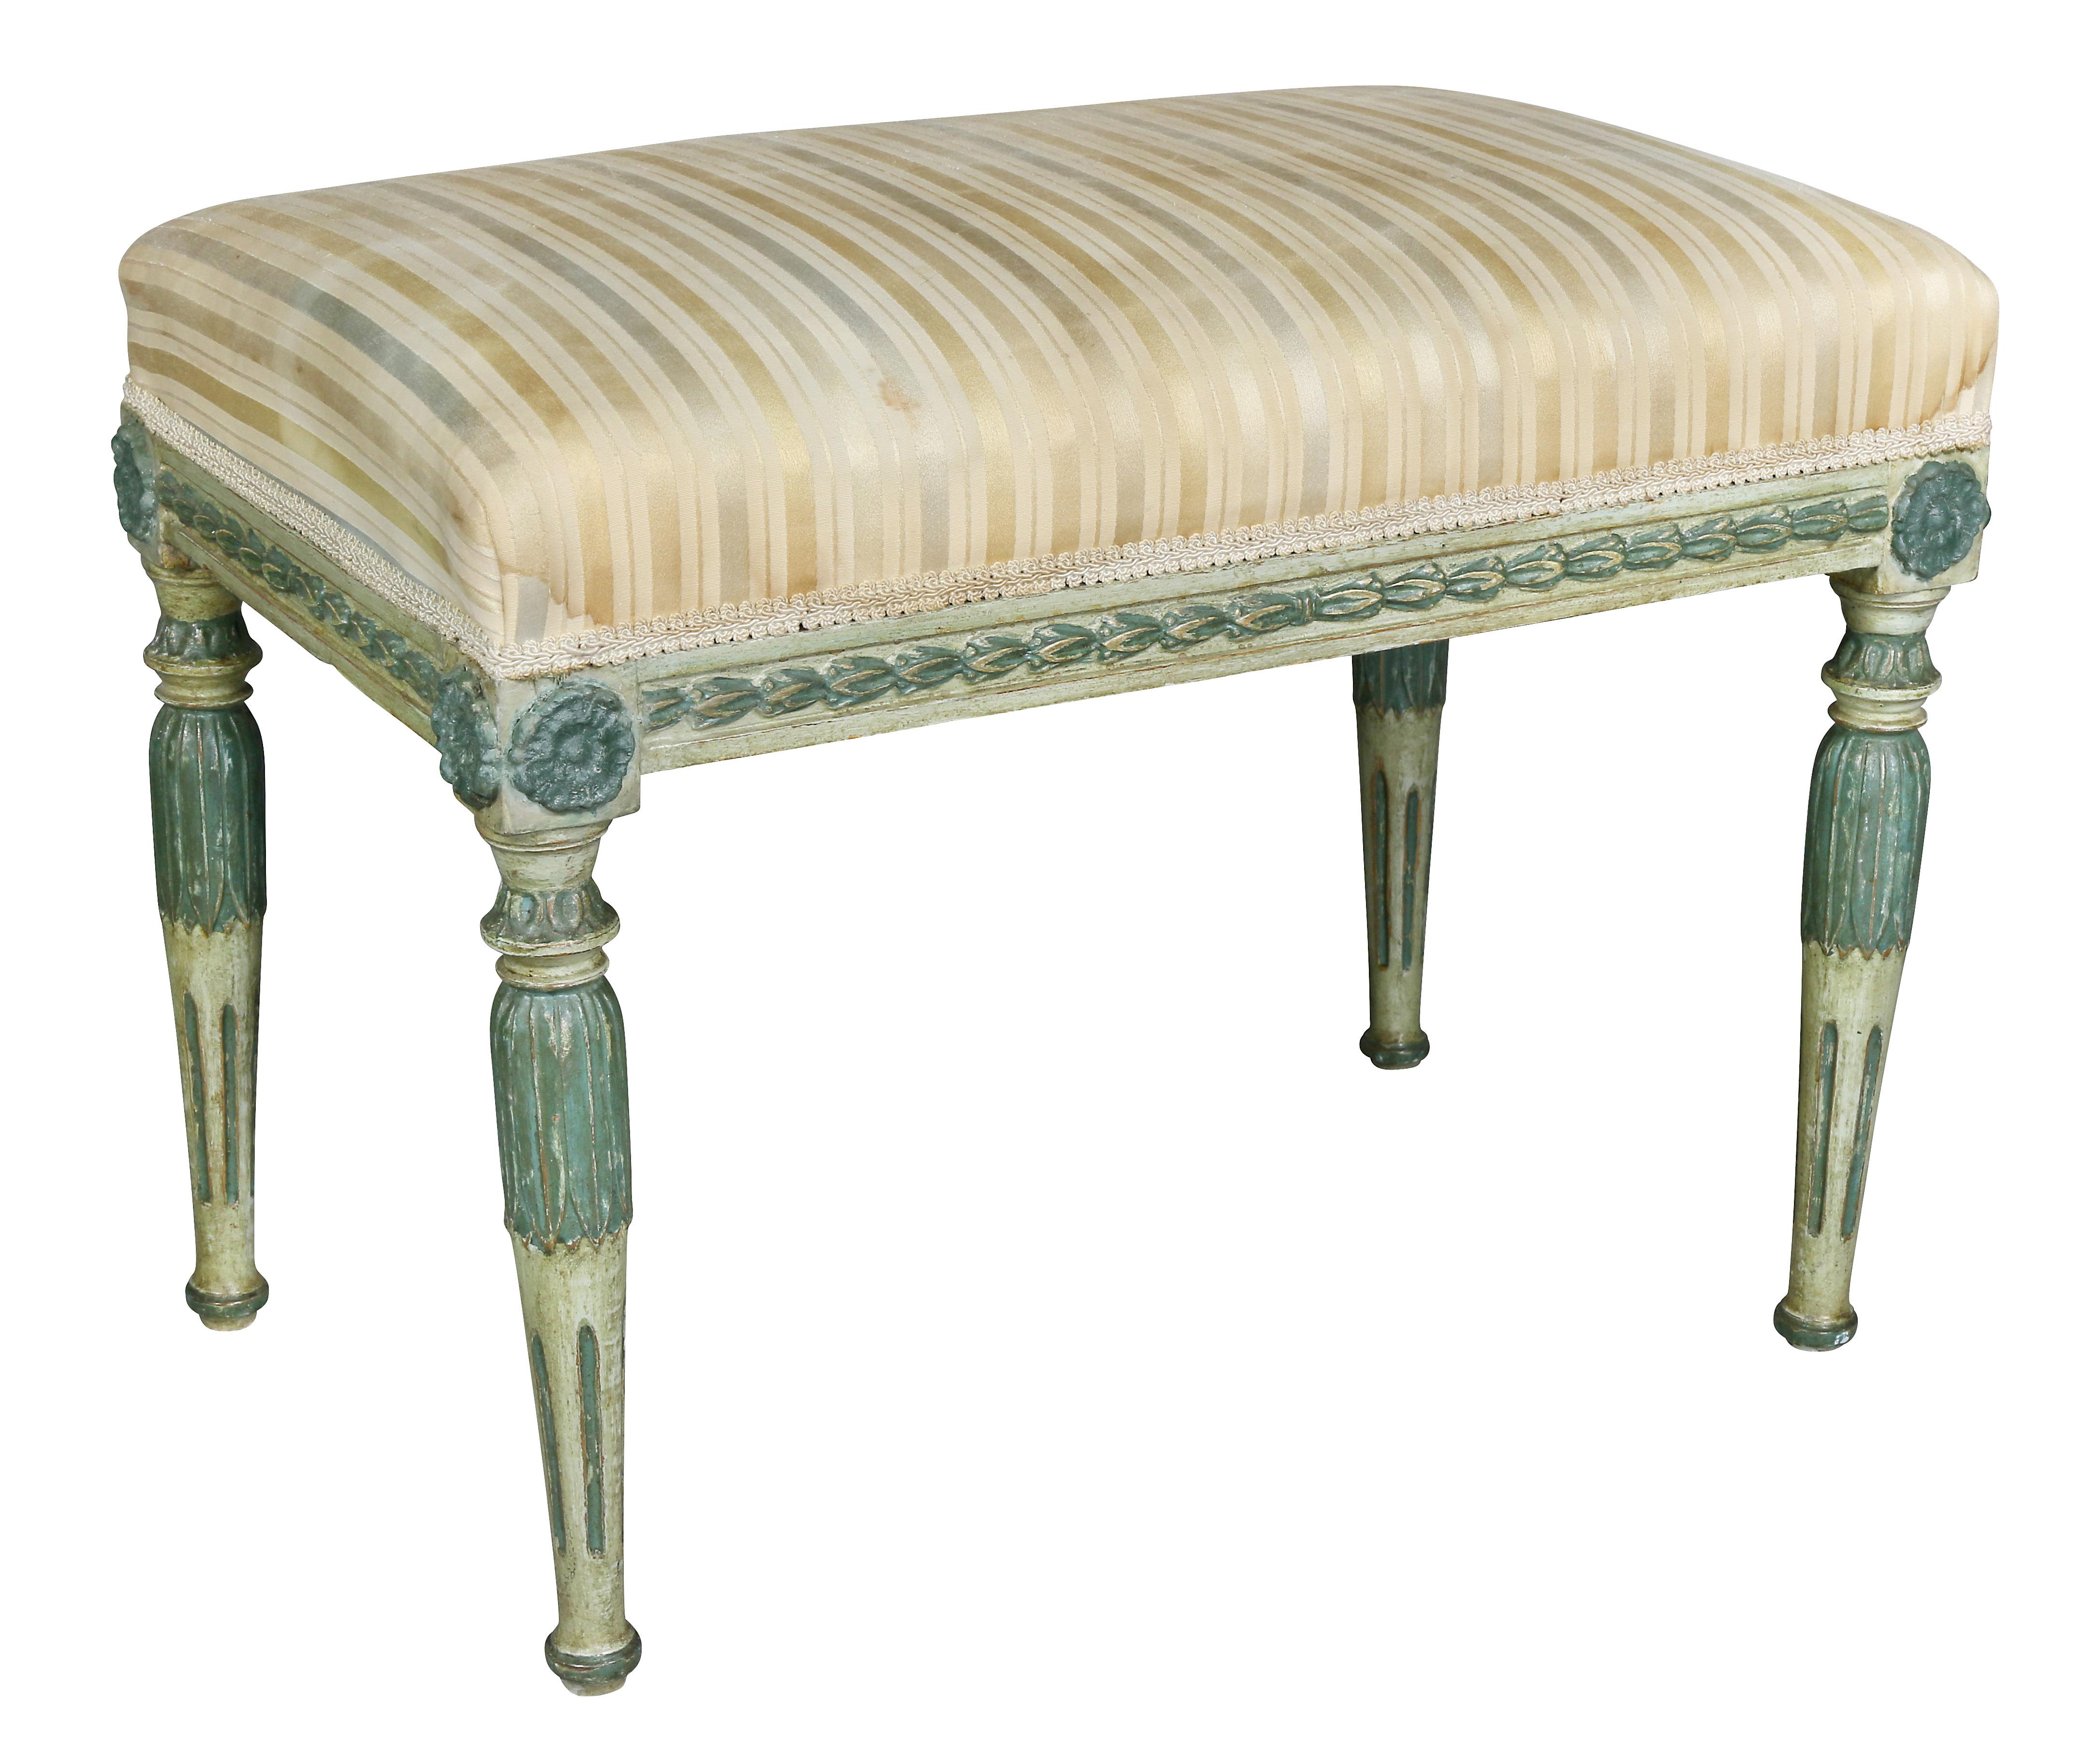 Each with rectangular upholstered seats, leaf carved seat rail and raised on tapered, leaf carved and fluted legs. Provenance, Judith Leiber.